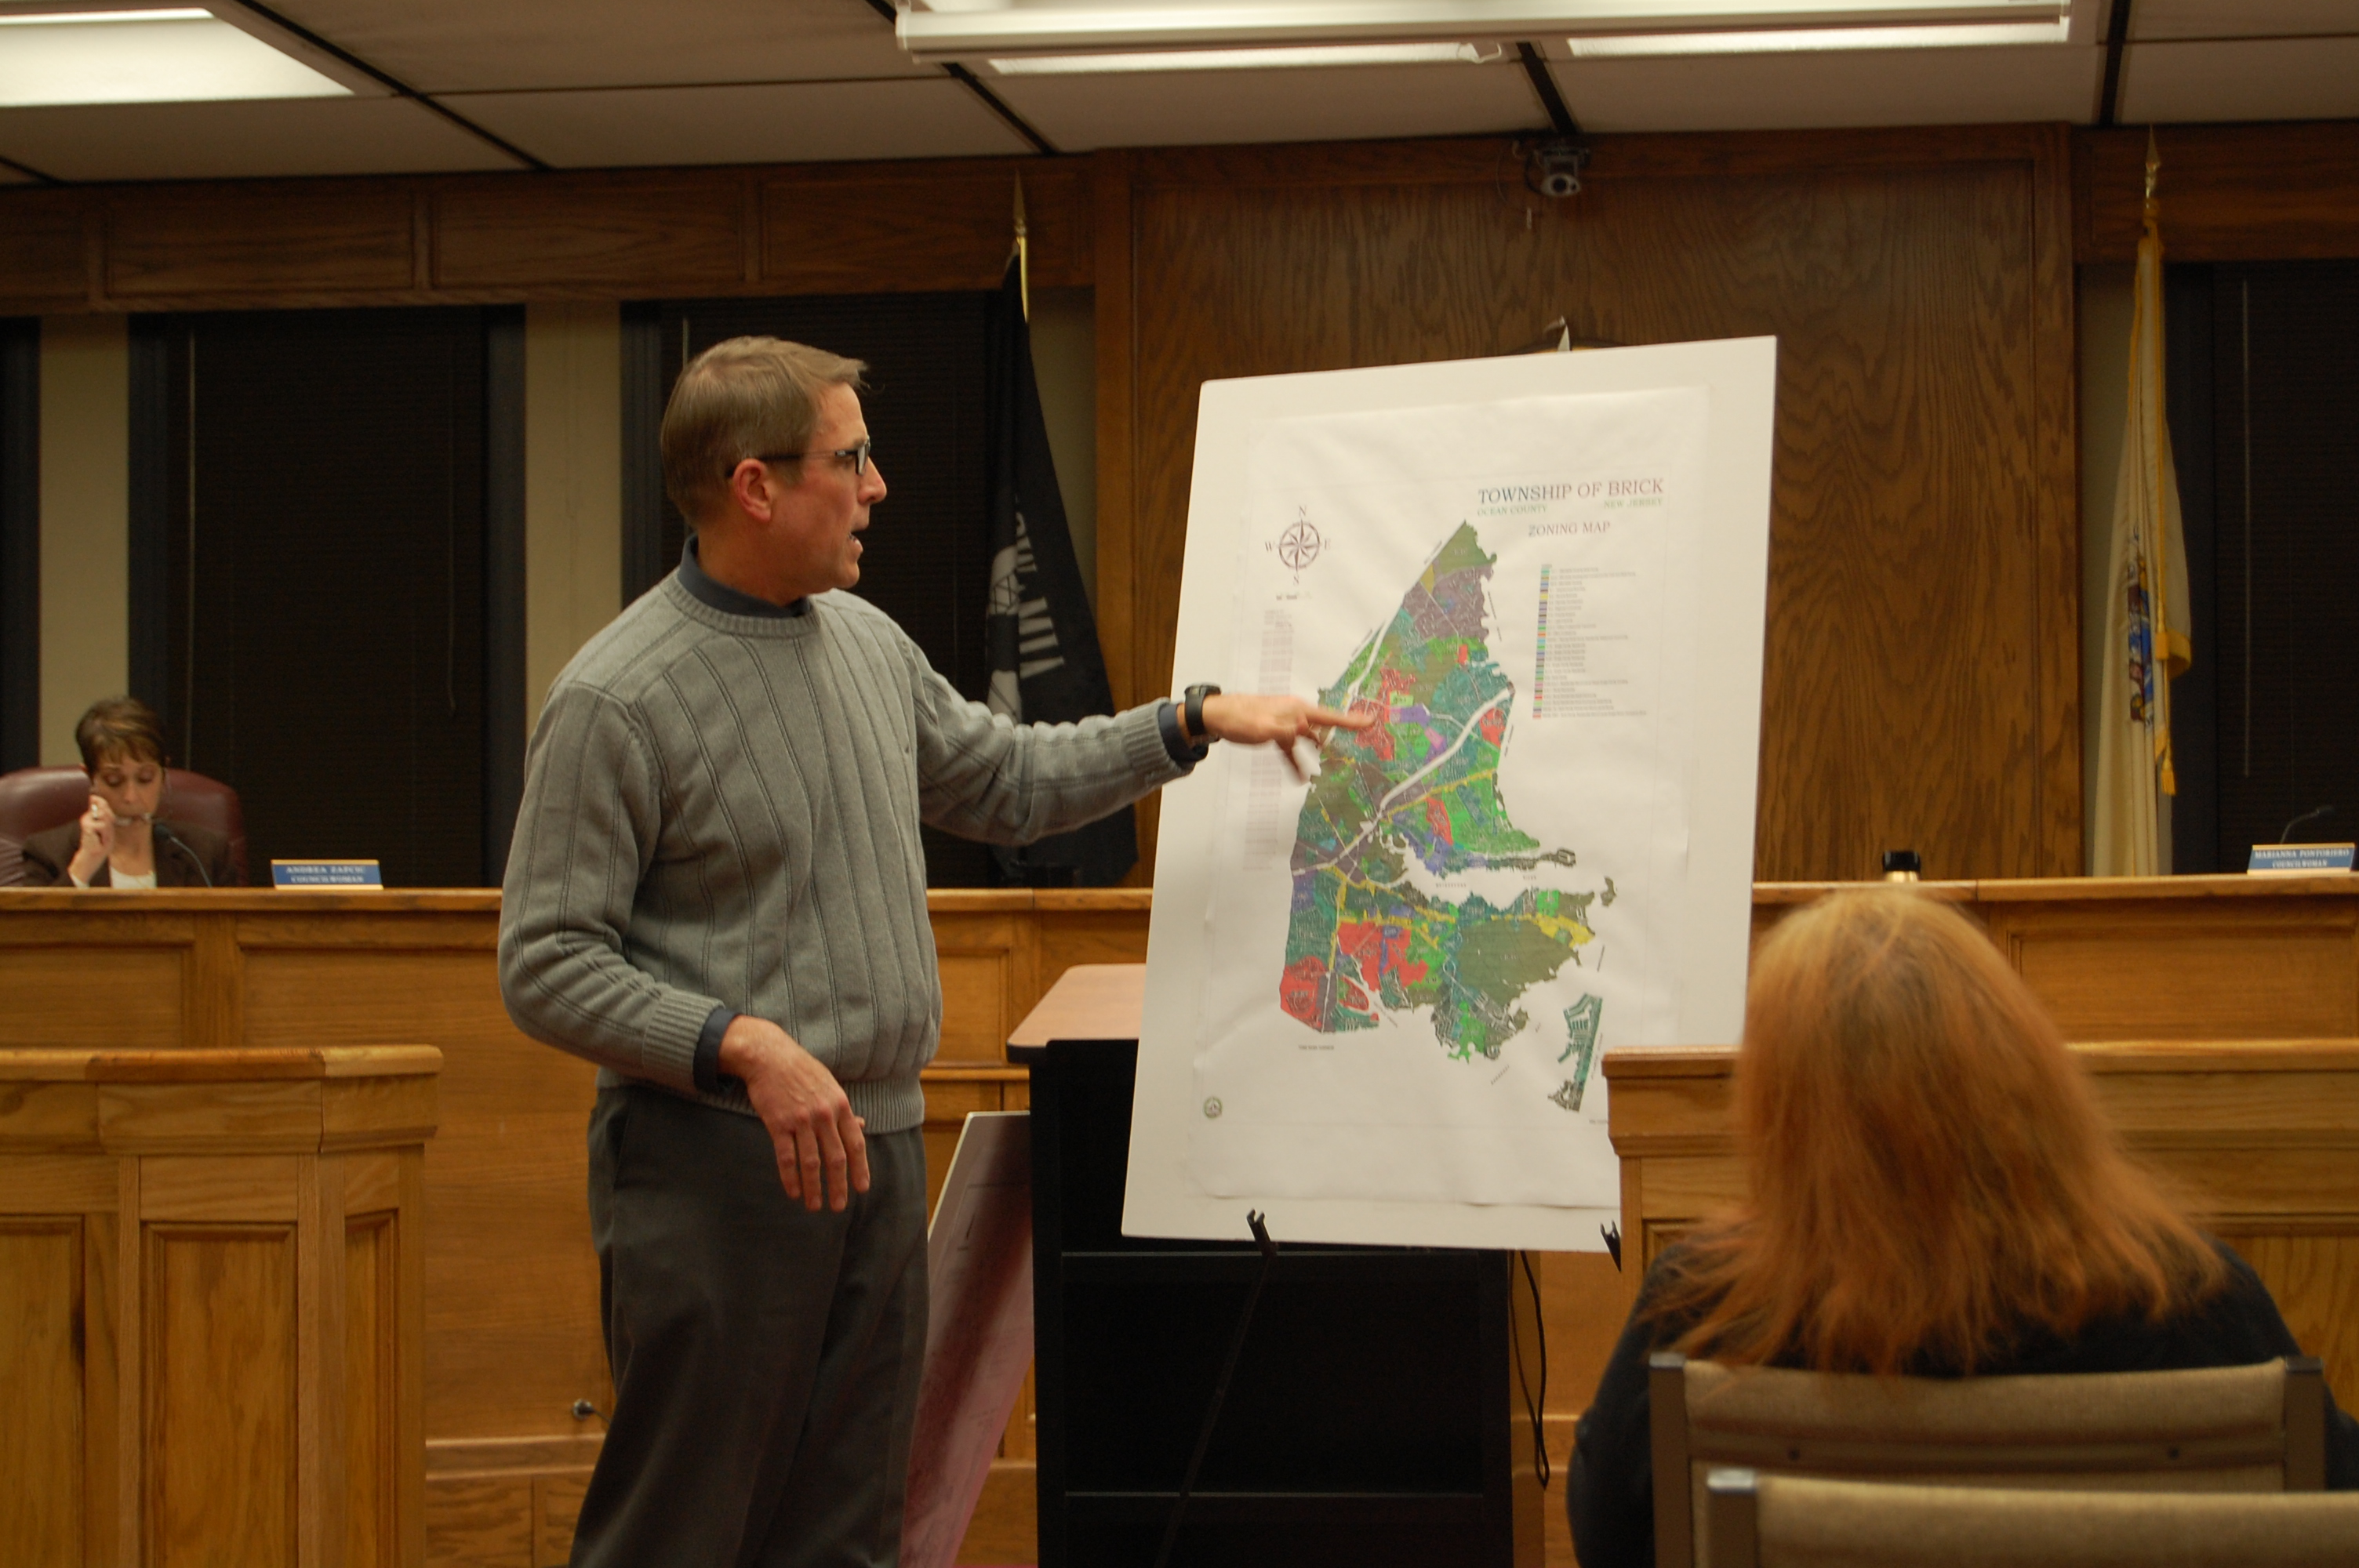 Township Planner Mike Fowlers shows off a display of the new color zoning maps. (Photo: Daniel Nee)